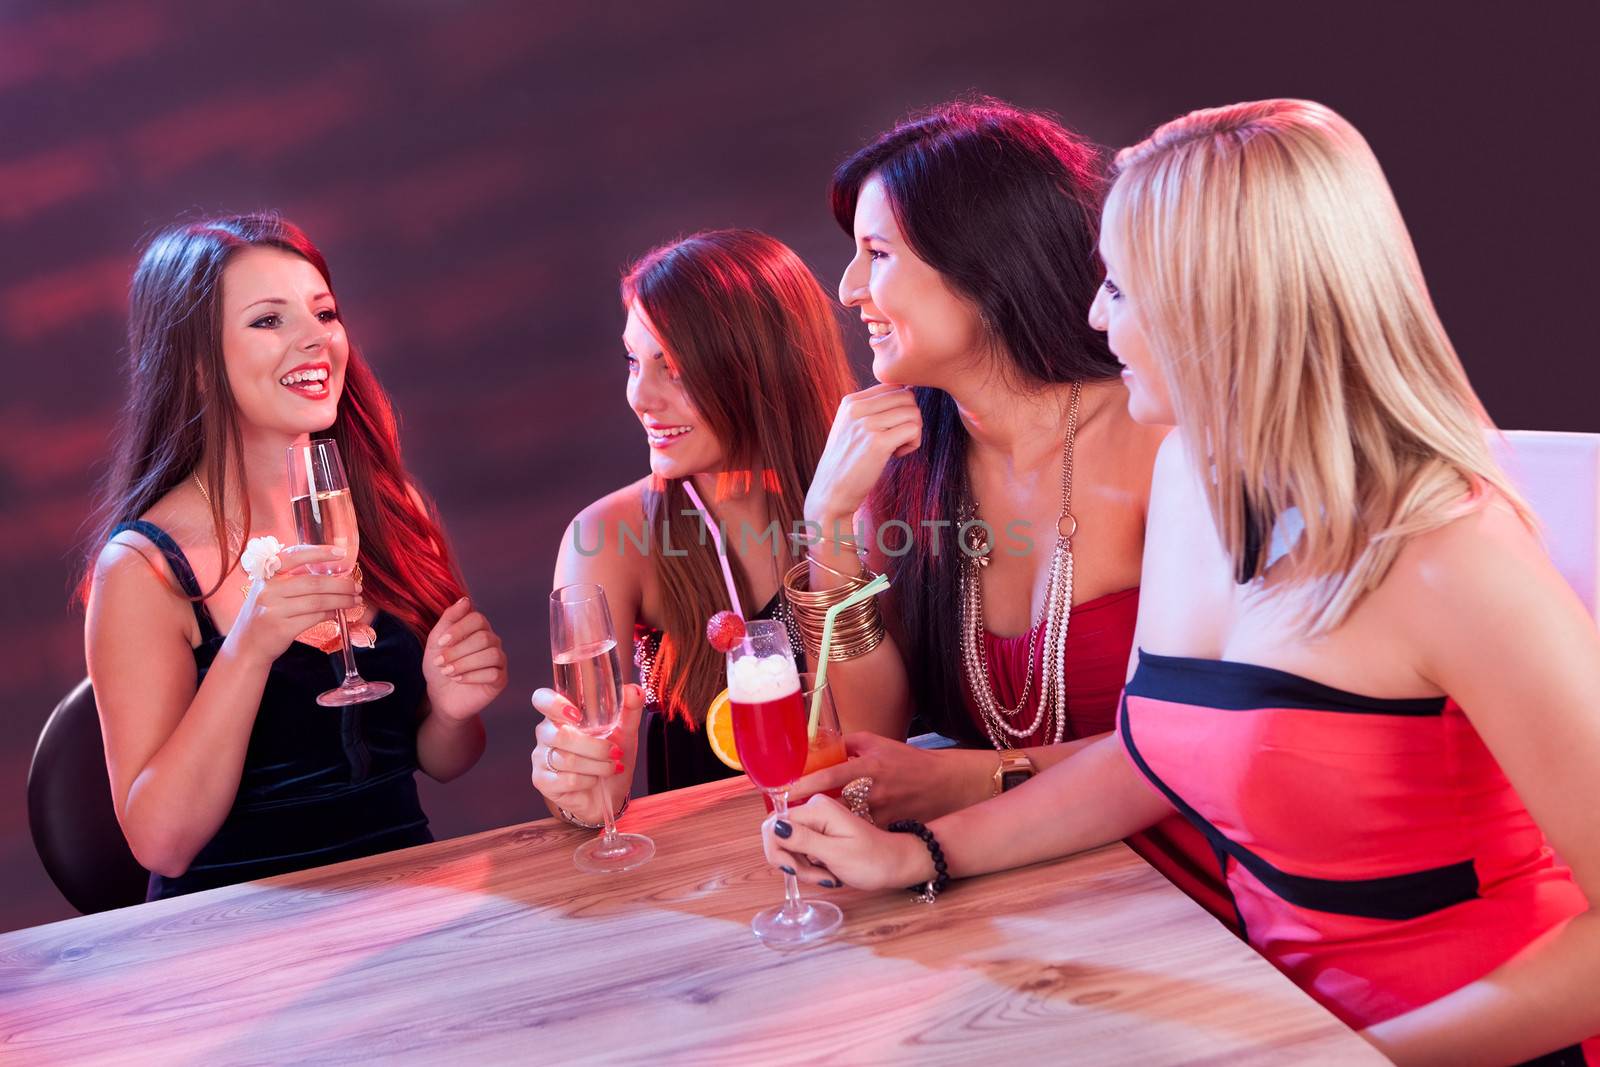 Female friends enjoying a night out by AndreyPopov